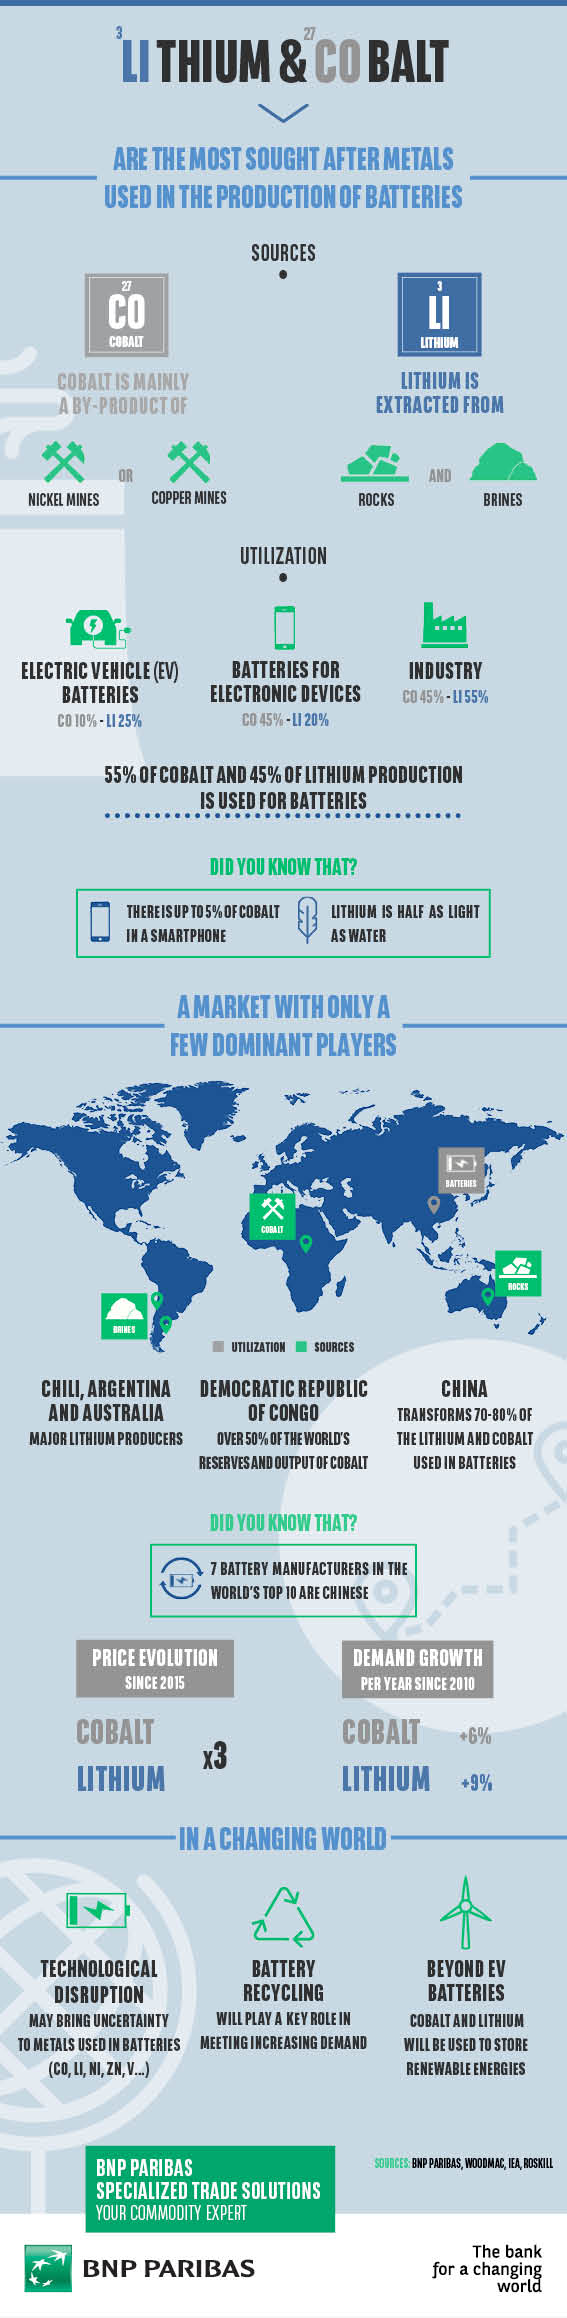 Lithium and cobalt infographic